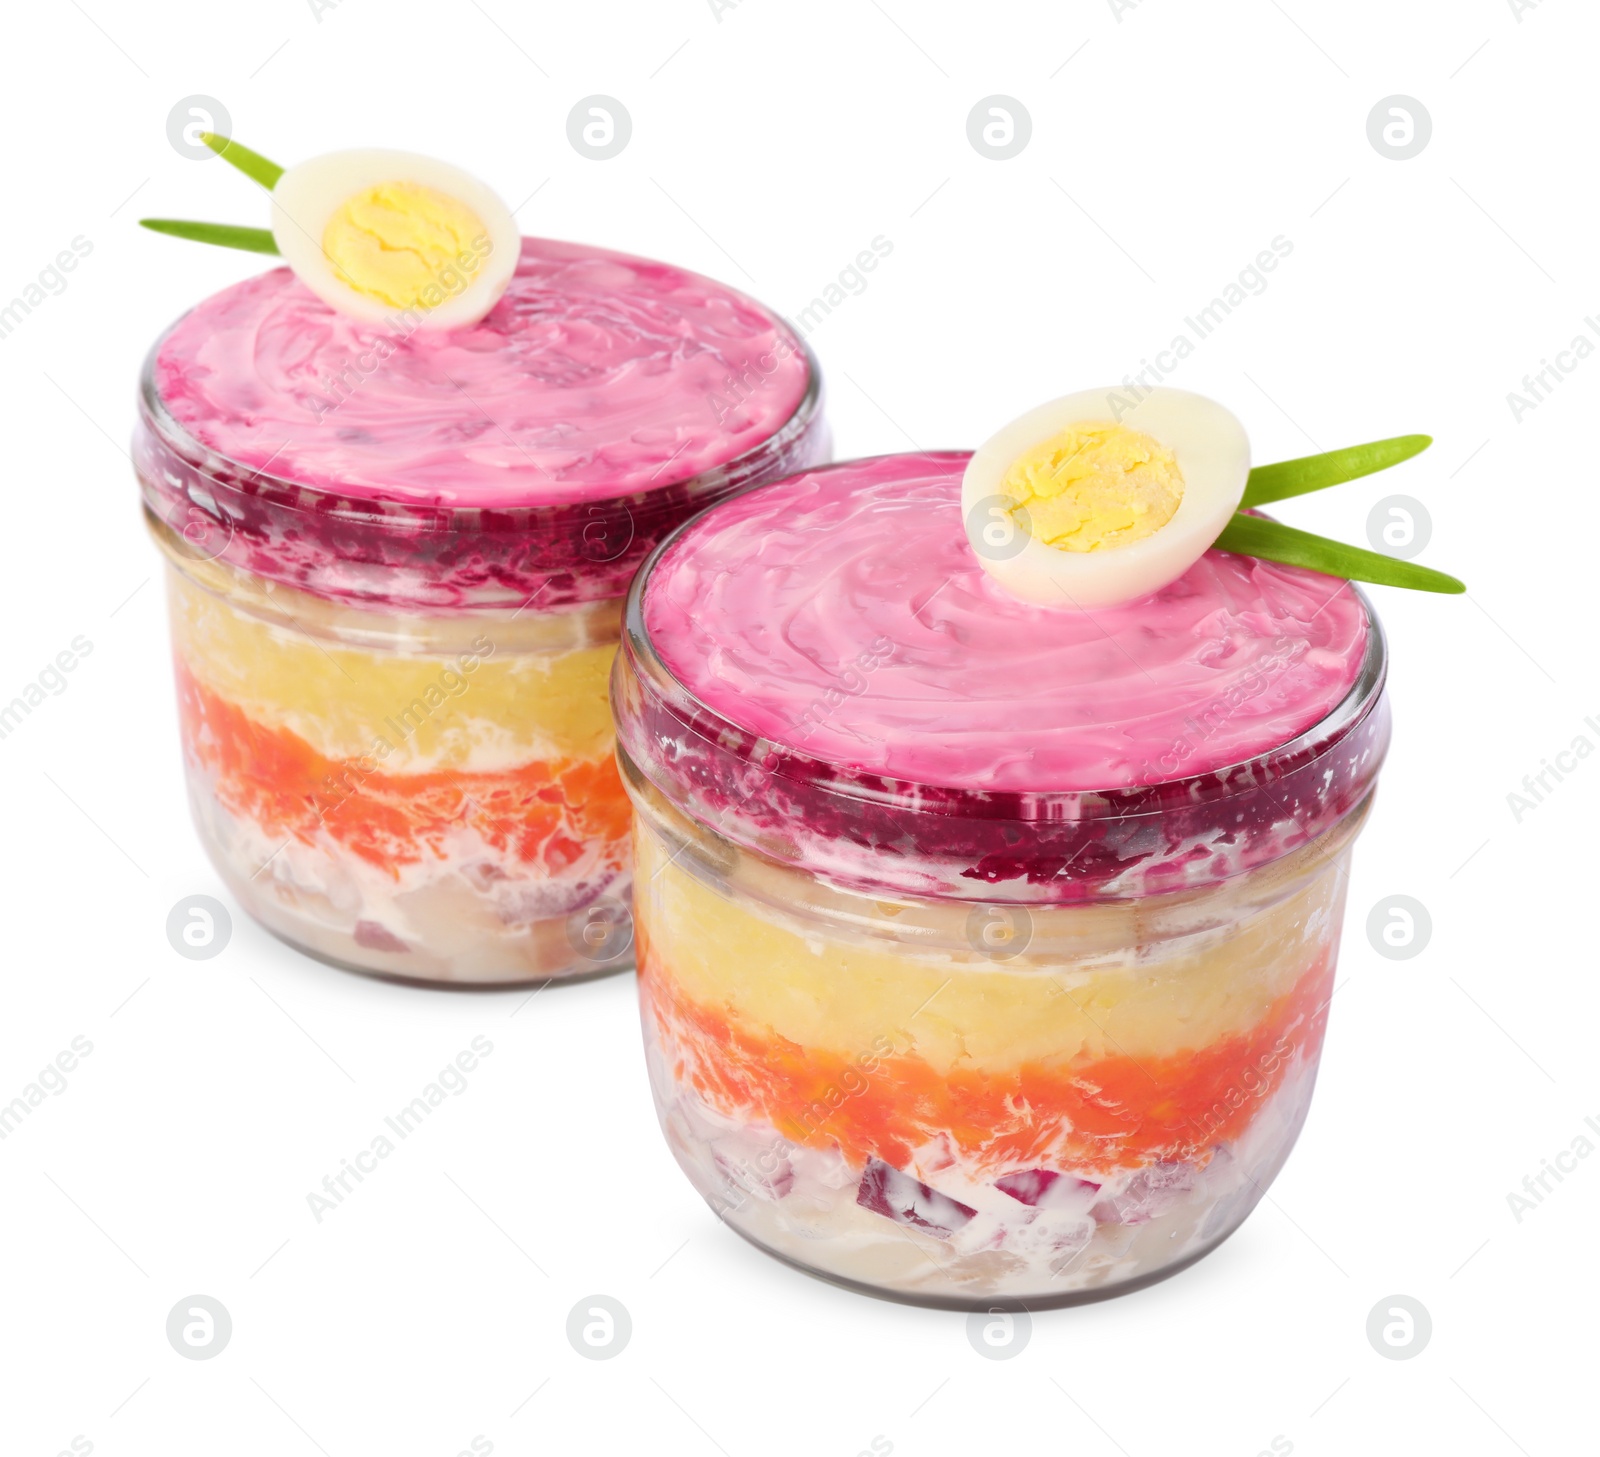 Photo of Jars with herring under fur coat isolated on white. Traditional Russian salad